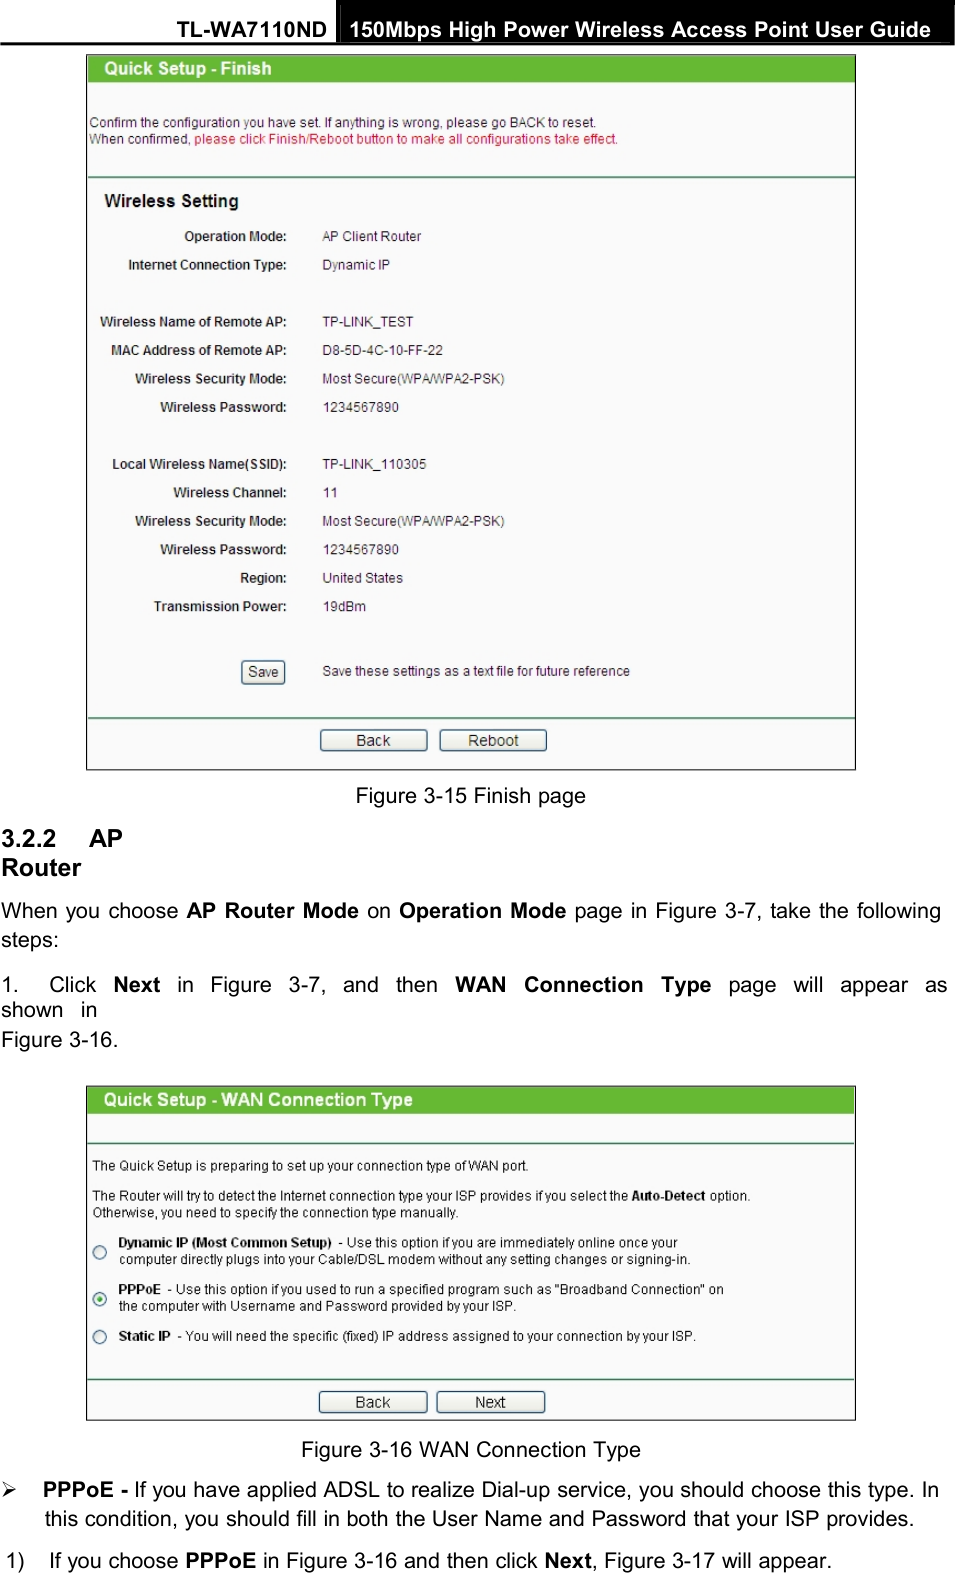 TL-WA7110ND 150Mbps High Power Wireless Access Point User Guide3.2.2 APRouterFigure 3-15 Finish pageWhen you choose AP Router Mode on Operation Mode page in Figure 3-7, take the followingsteps:1. Click Next in Figure 3-7, and then WAN Connection Type page will appear asshown inFigure 3-16.Figure 3-16 WAN Connection TypePPPoE - If you have applied ADSL to realize Dial-up service, you should choose this type. Inthis condition, you should fill in both the User Name and Password that your ISP provides.1) If you choose PPPoE in Figure 3-16 and then click Next, Figure 3-17 will appear.